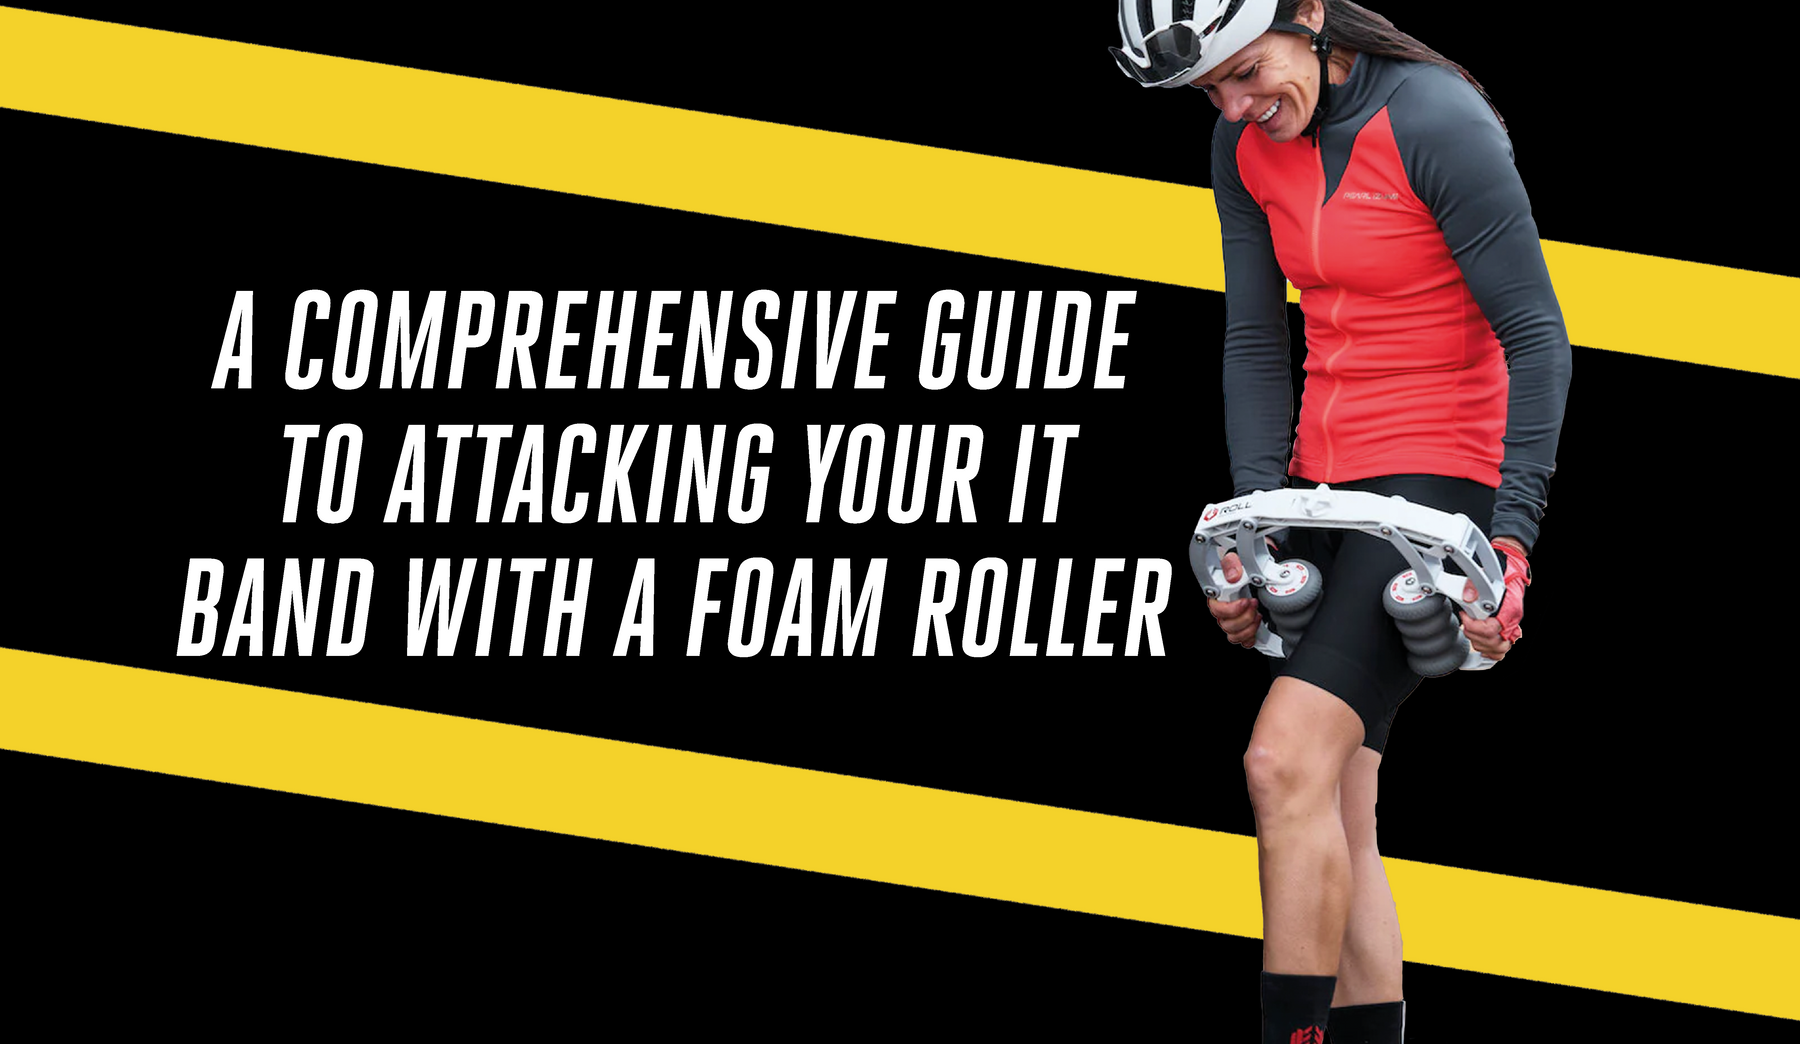 A Comprehensive Guide to Attacking Your IT Band with a Foam Roller